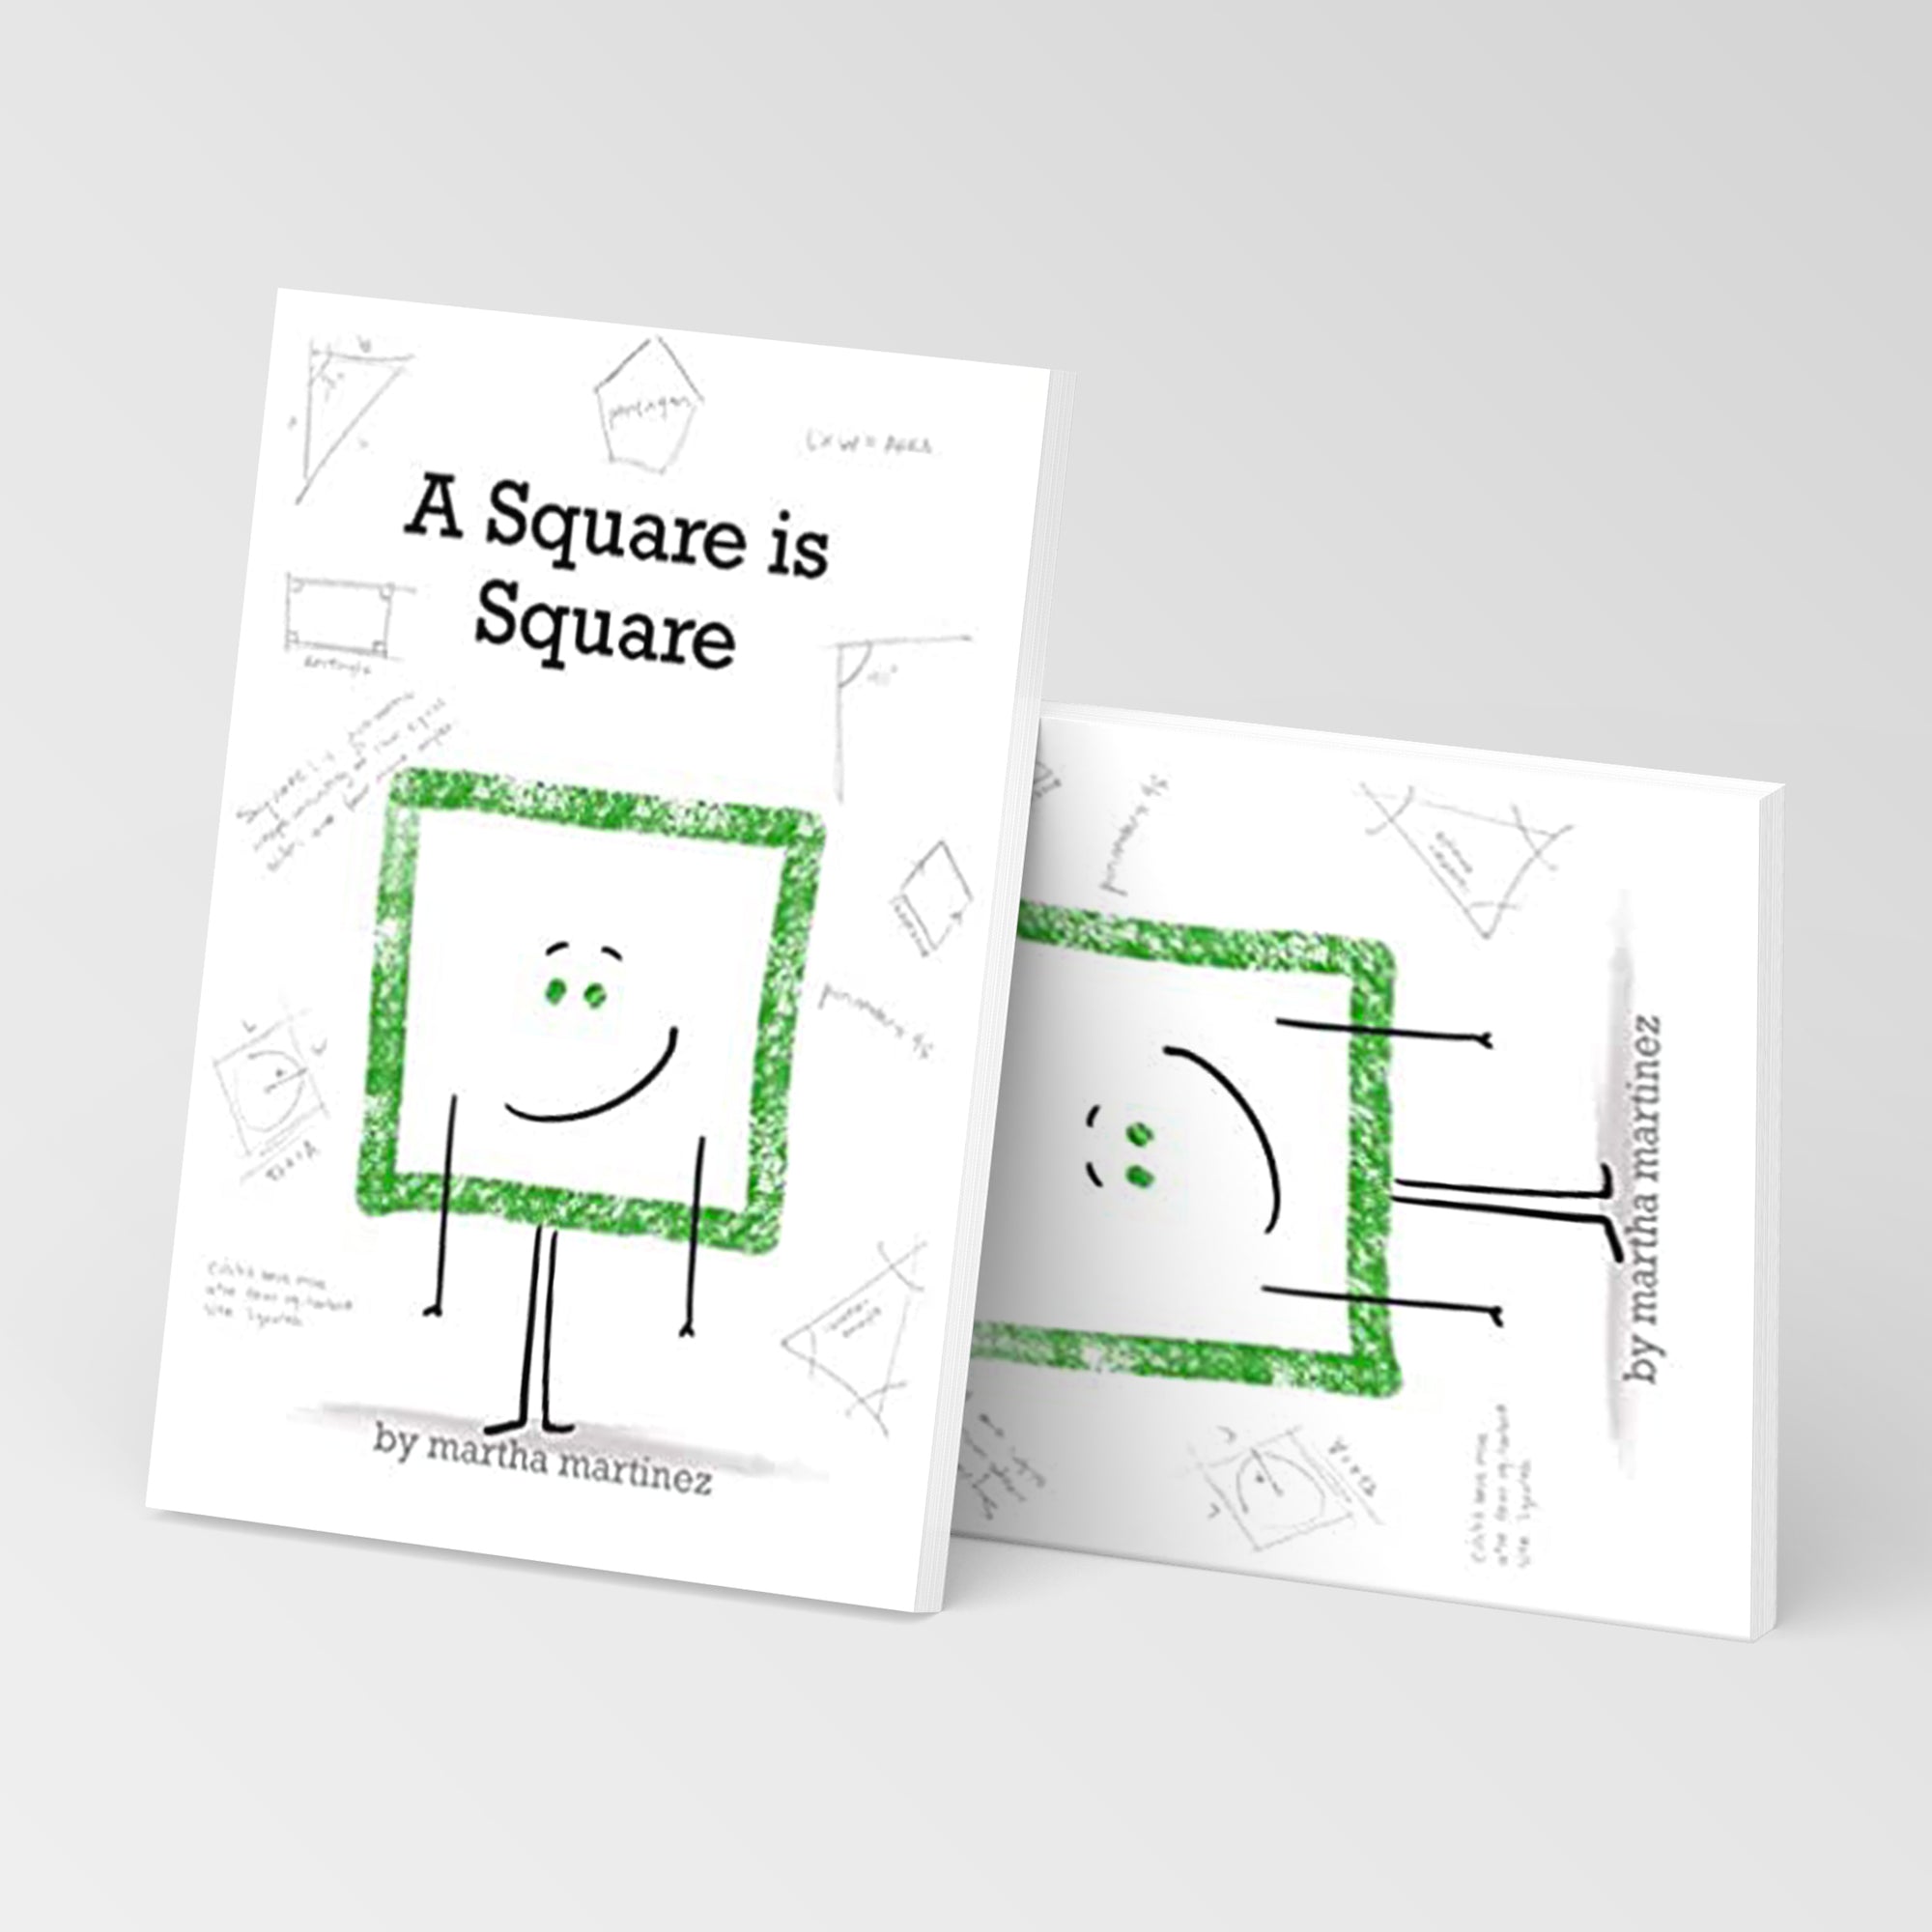 A Square is a Square